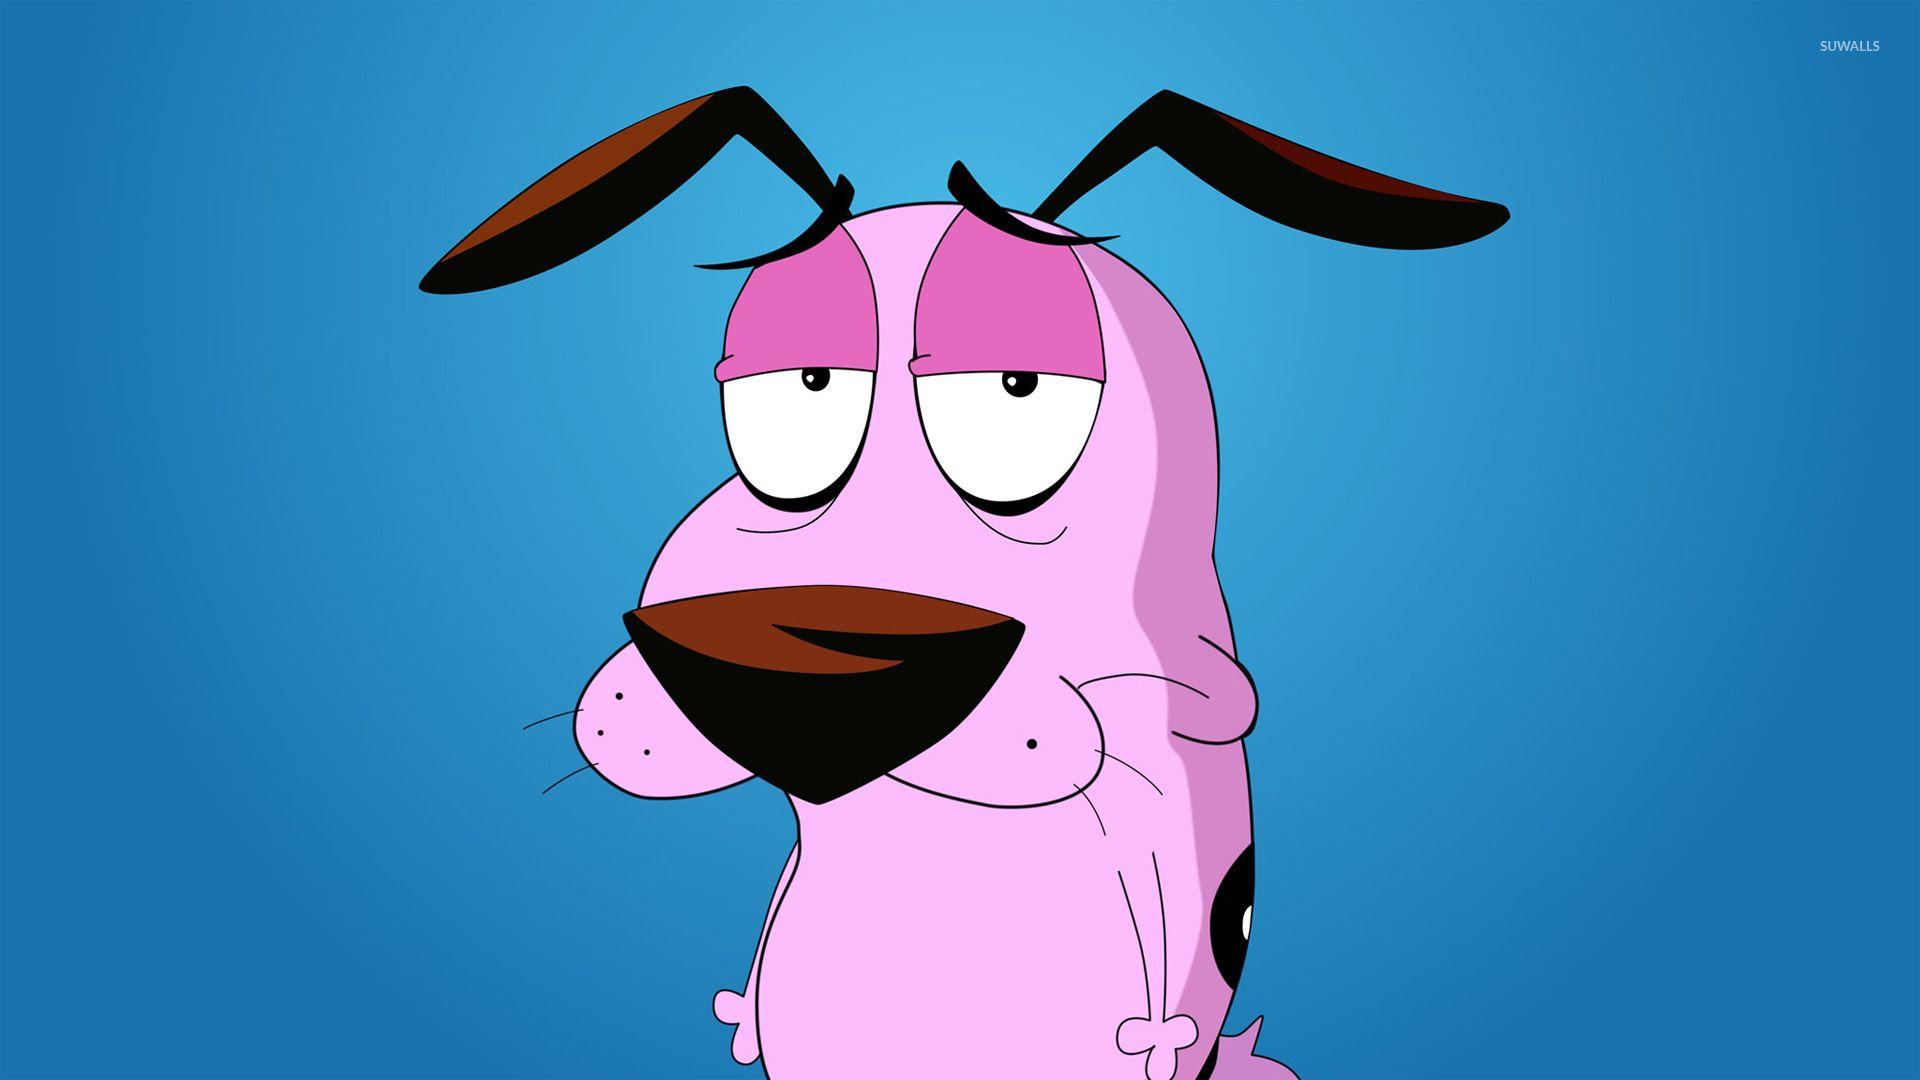 Courage the Cowardly Dog wallpaper wallpaper